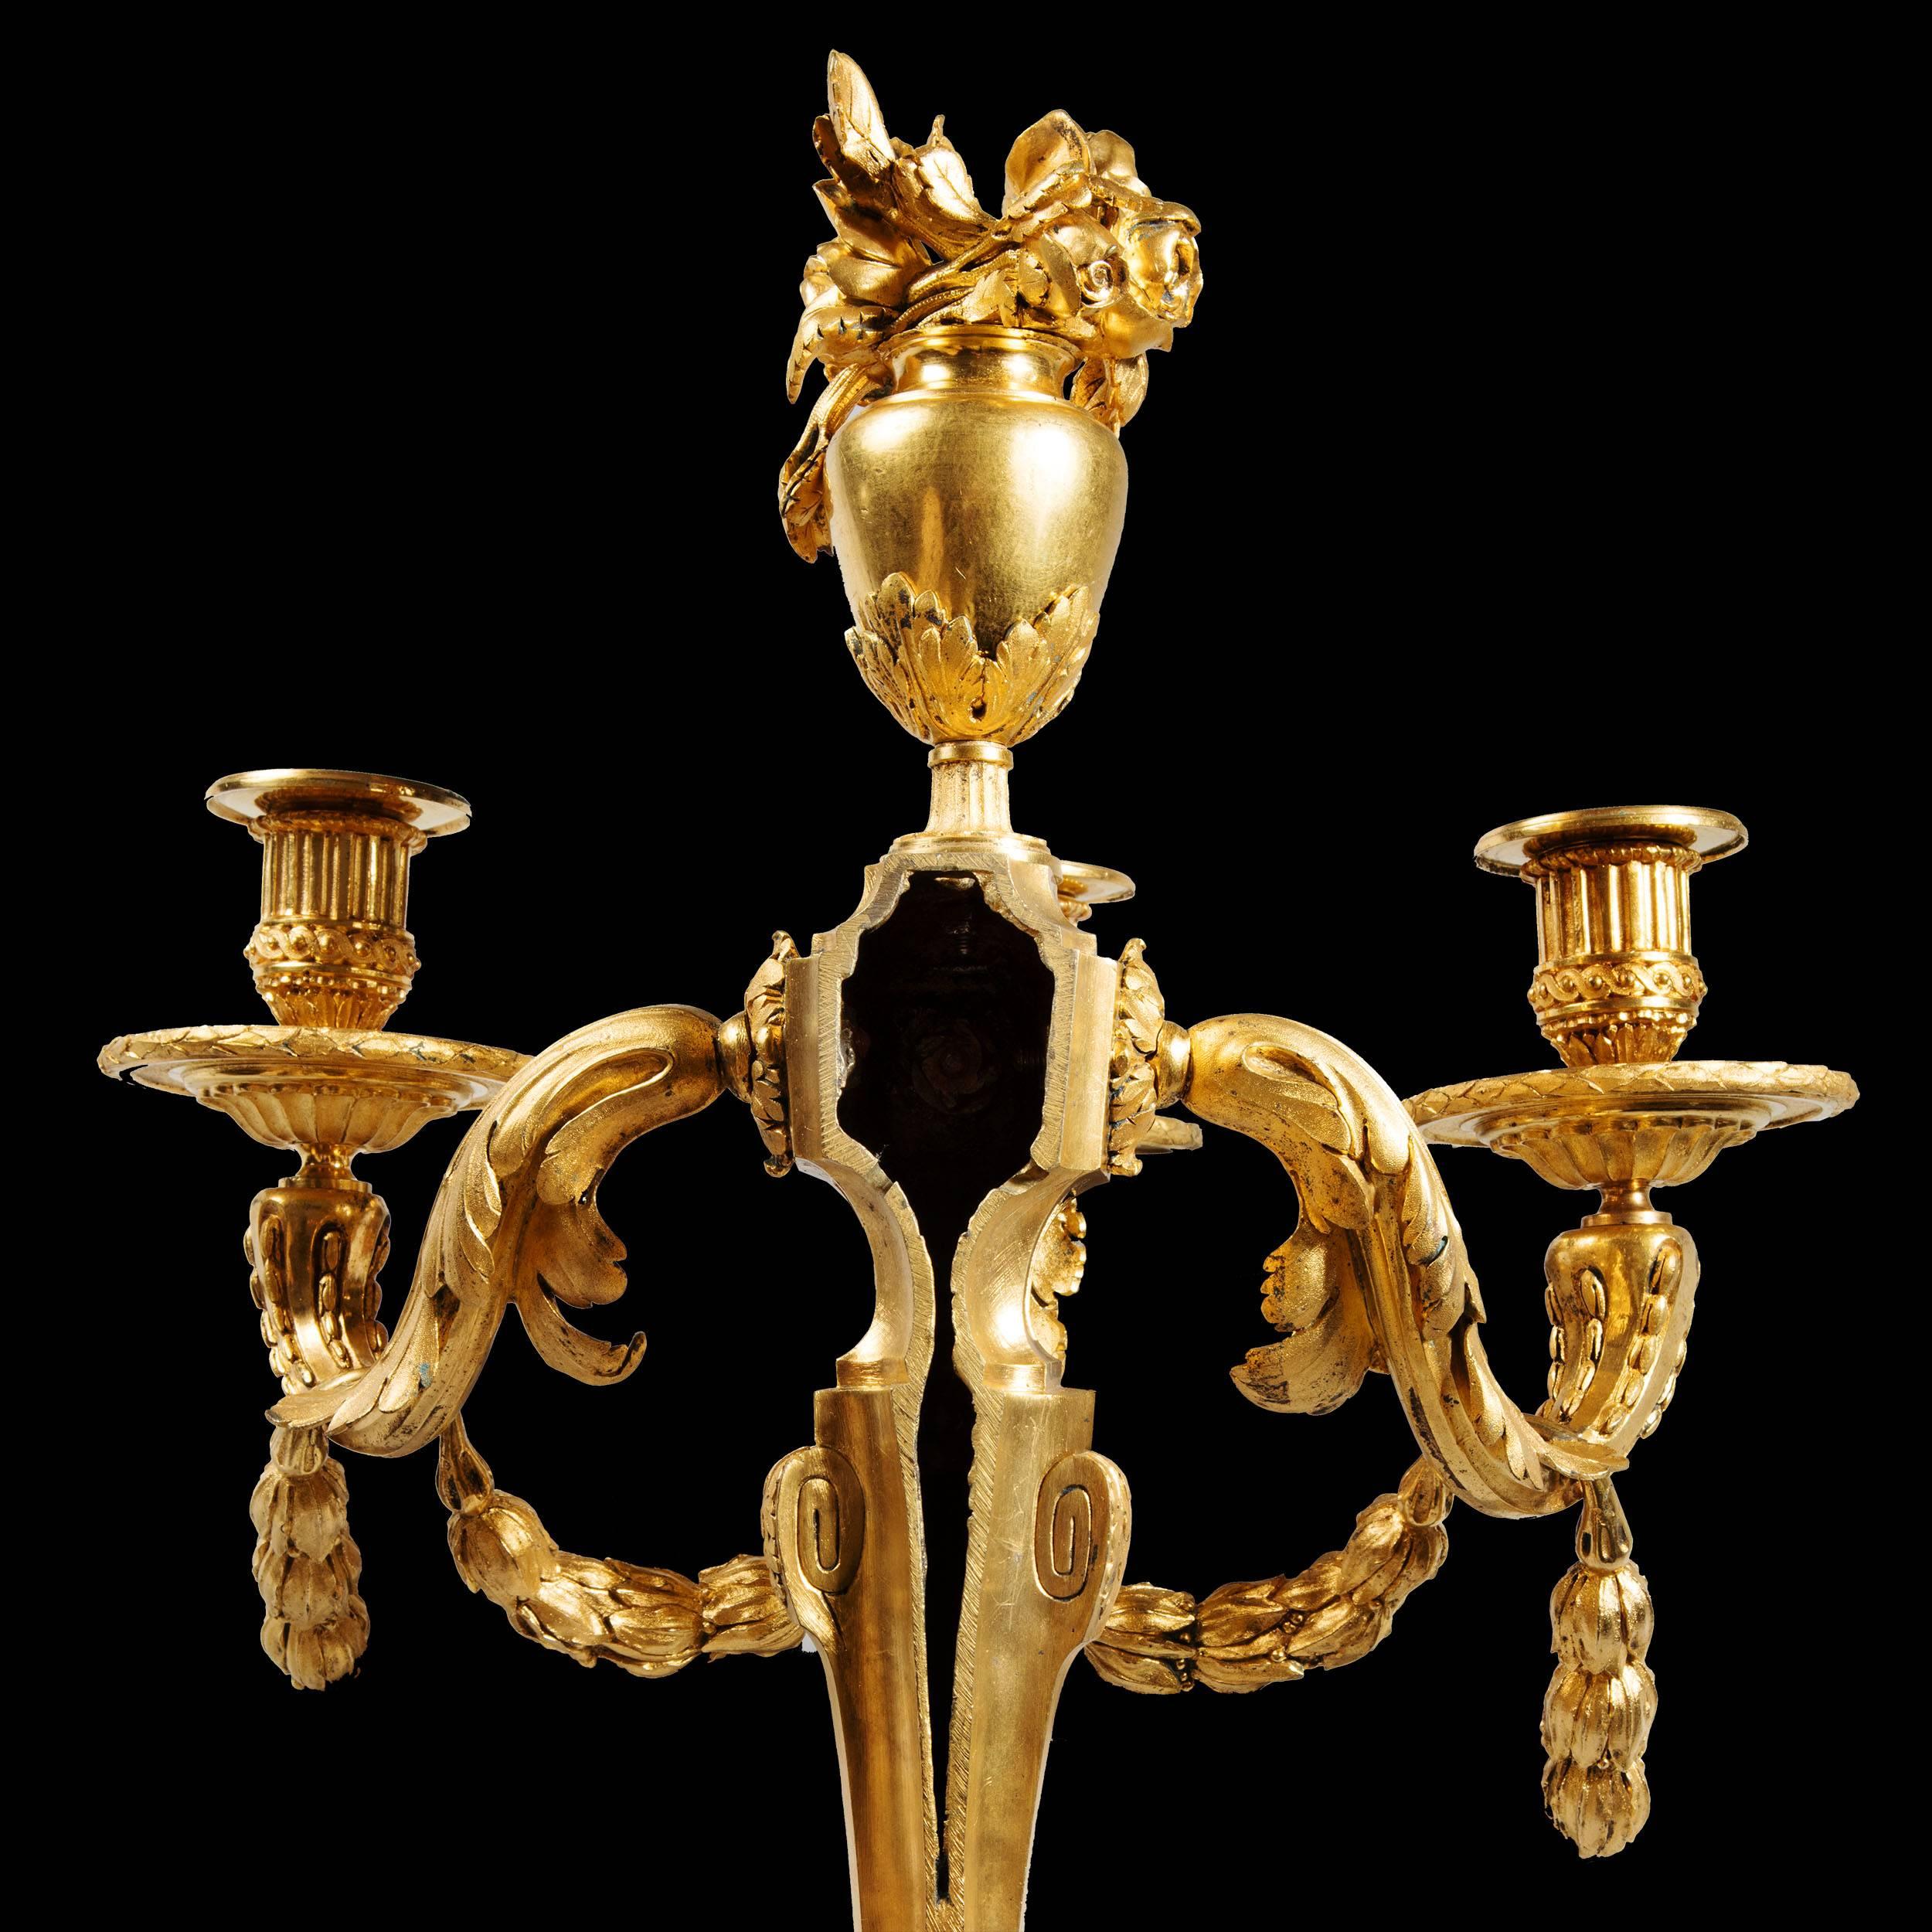 18th Century Monumental Pair of Louis XVI Gilt Bronze Wall Sconces Jean-Charles Delafosse For Sale